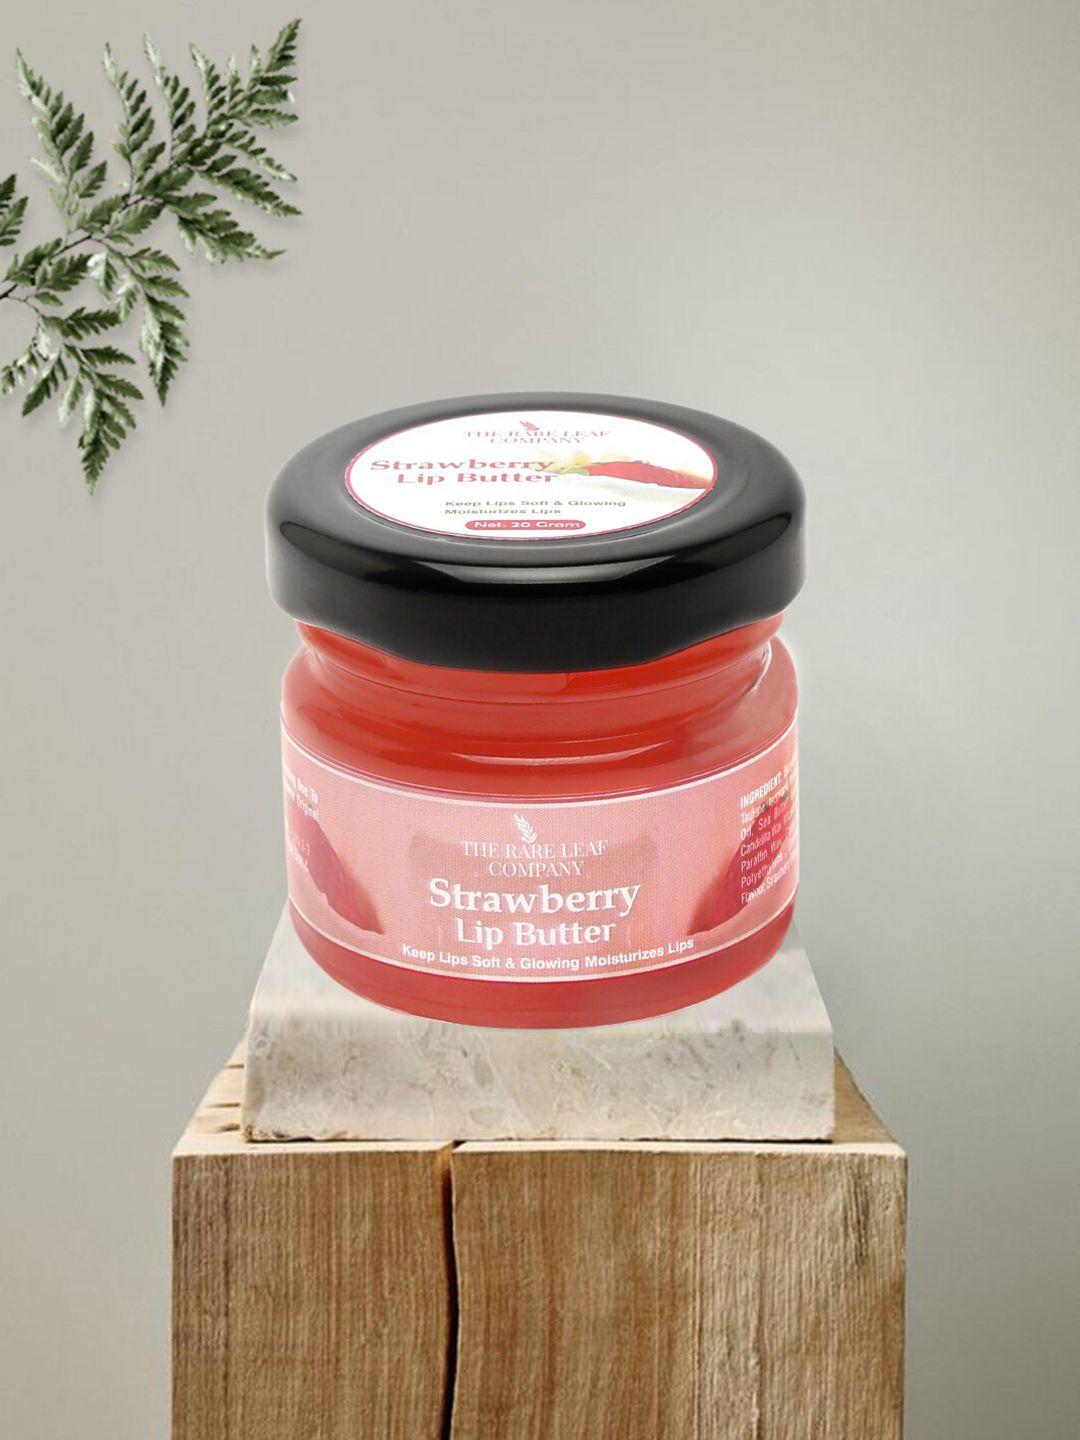 the rare leaf company natural uv protection lip butter 20 g - strawberry